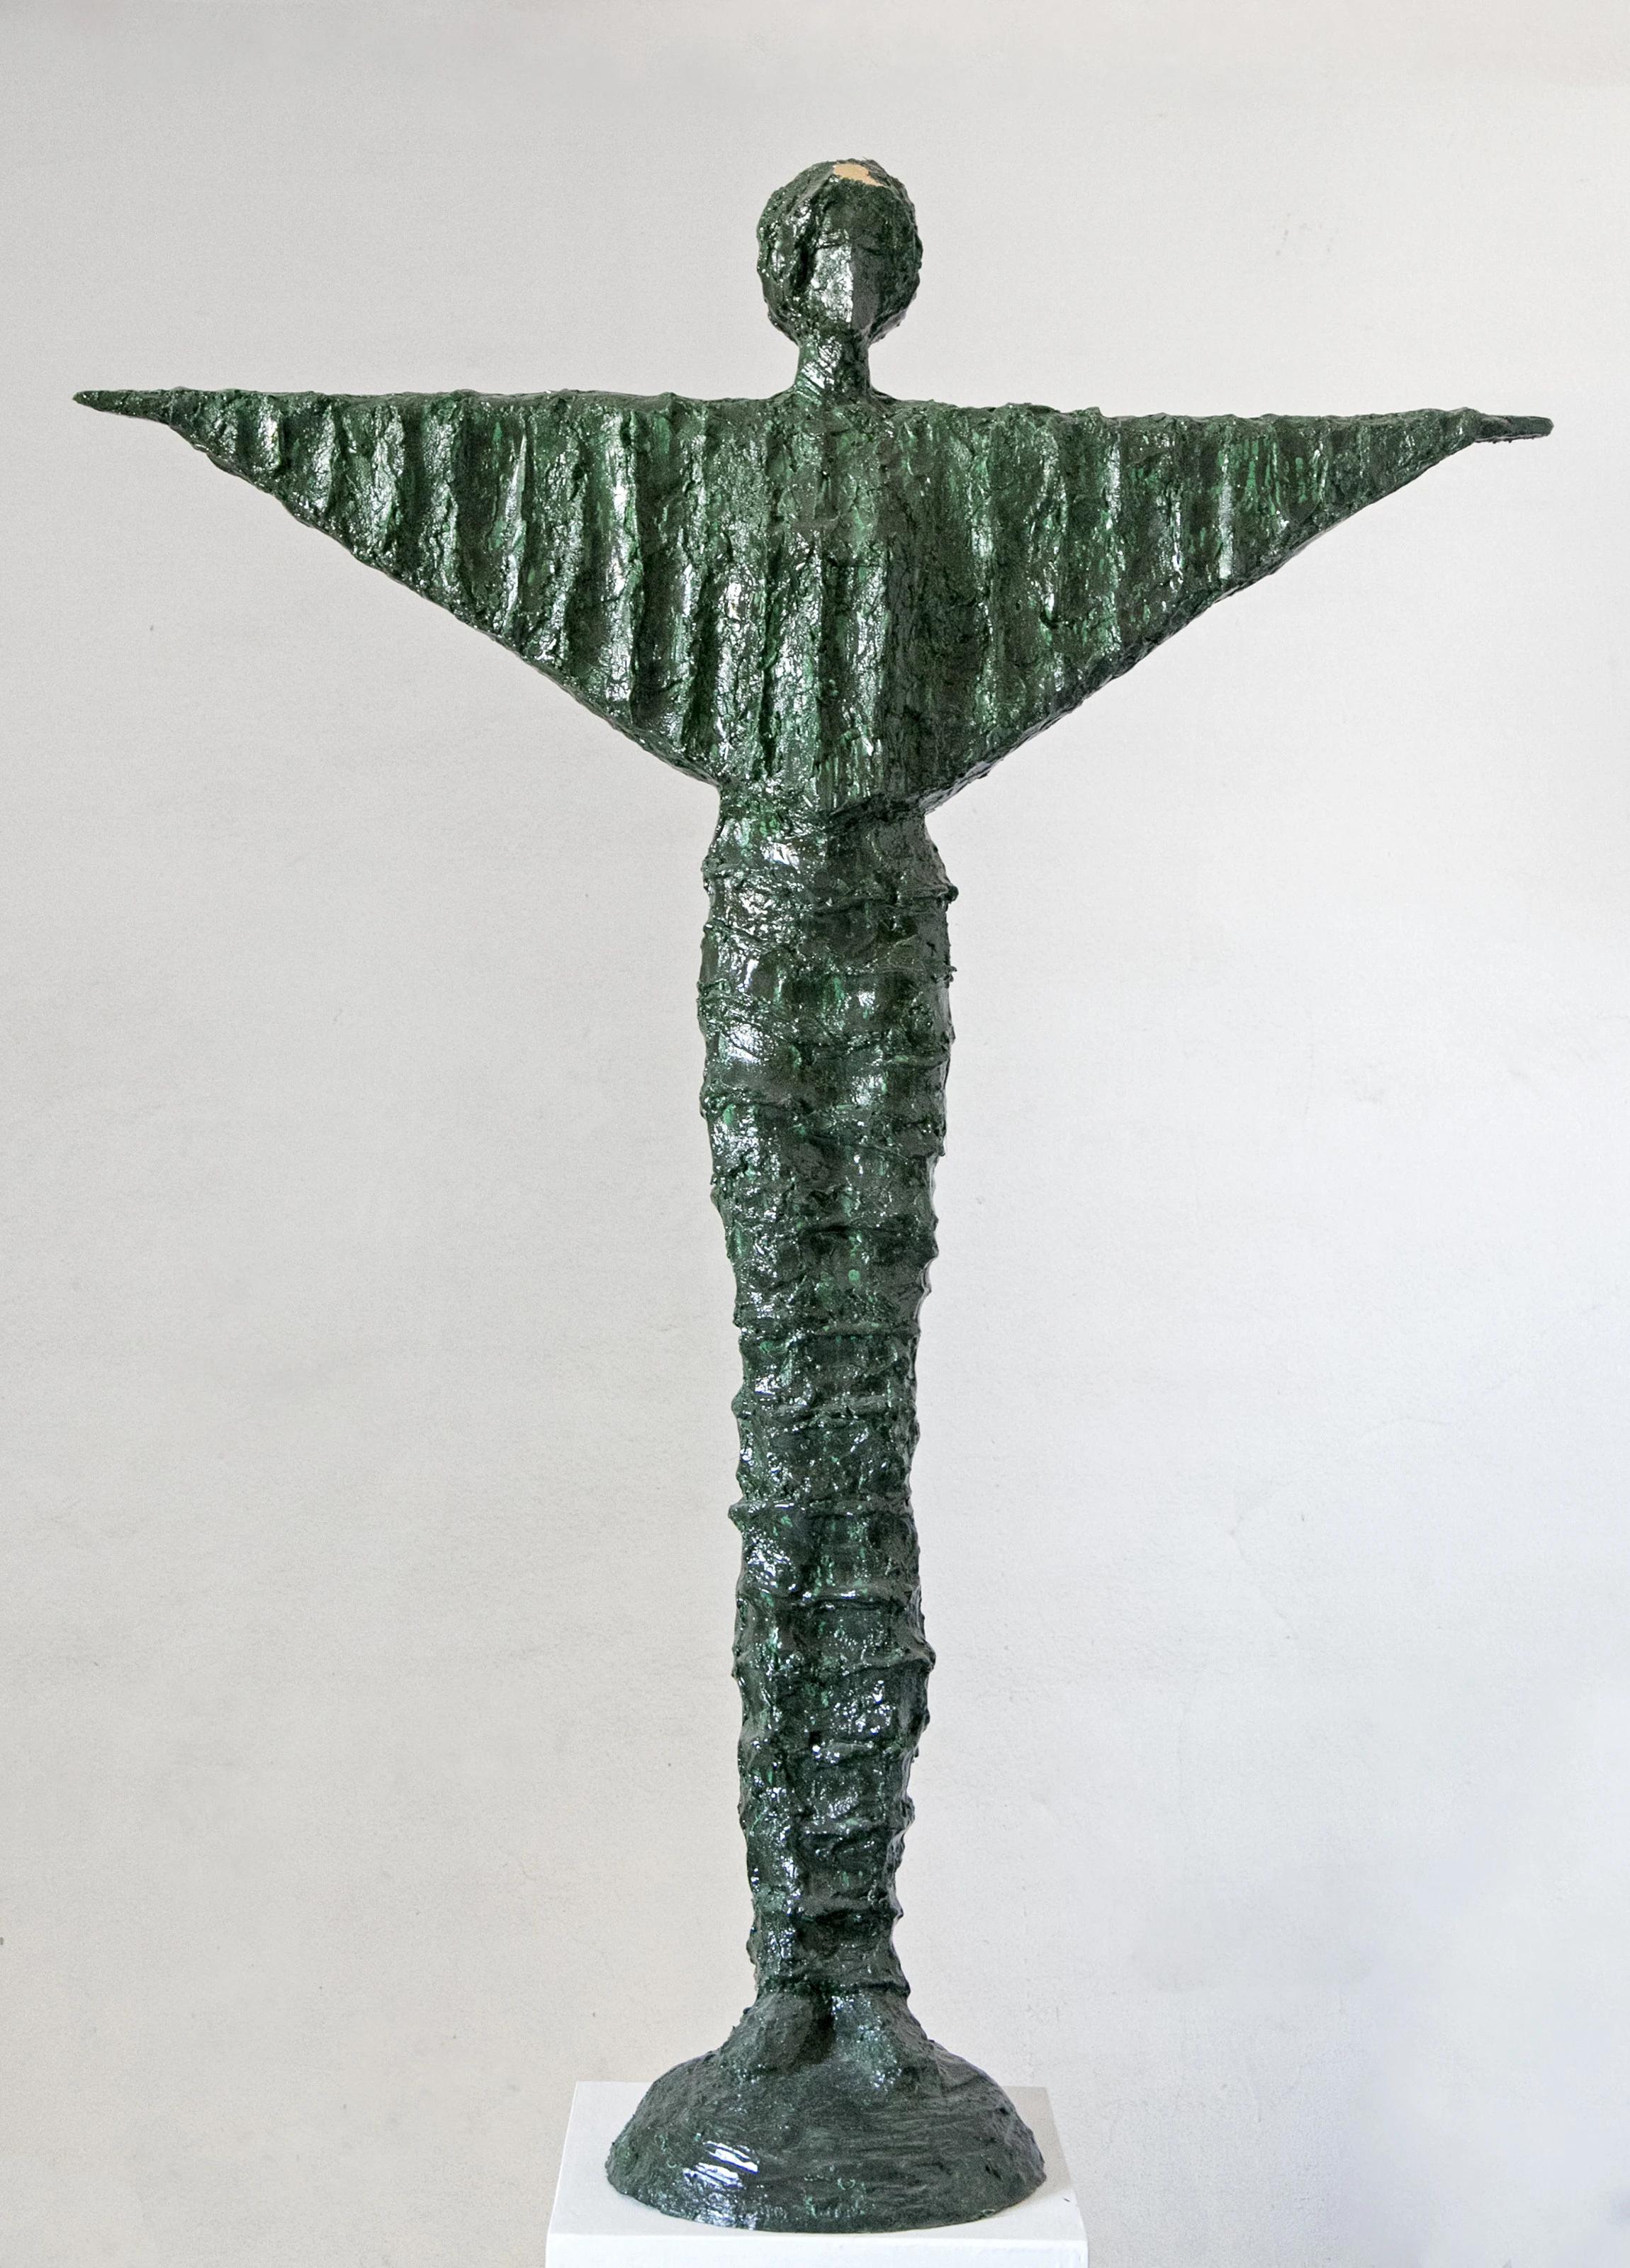 "Freedom I" Sculpture 49" x 38" x 6" inch by Sarkis Tossonian


Sarkis Tossoonian was born in Alexandria in 1953. He graduated from the Faculty of Fine Arts/Sculpture in 1979. He started exhibiting in individual and group exhibitions in Alexandria